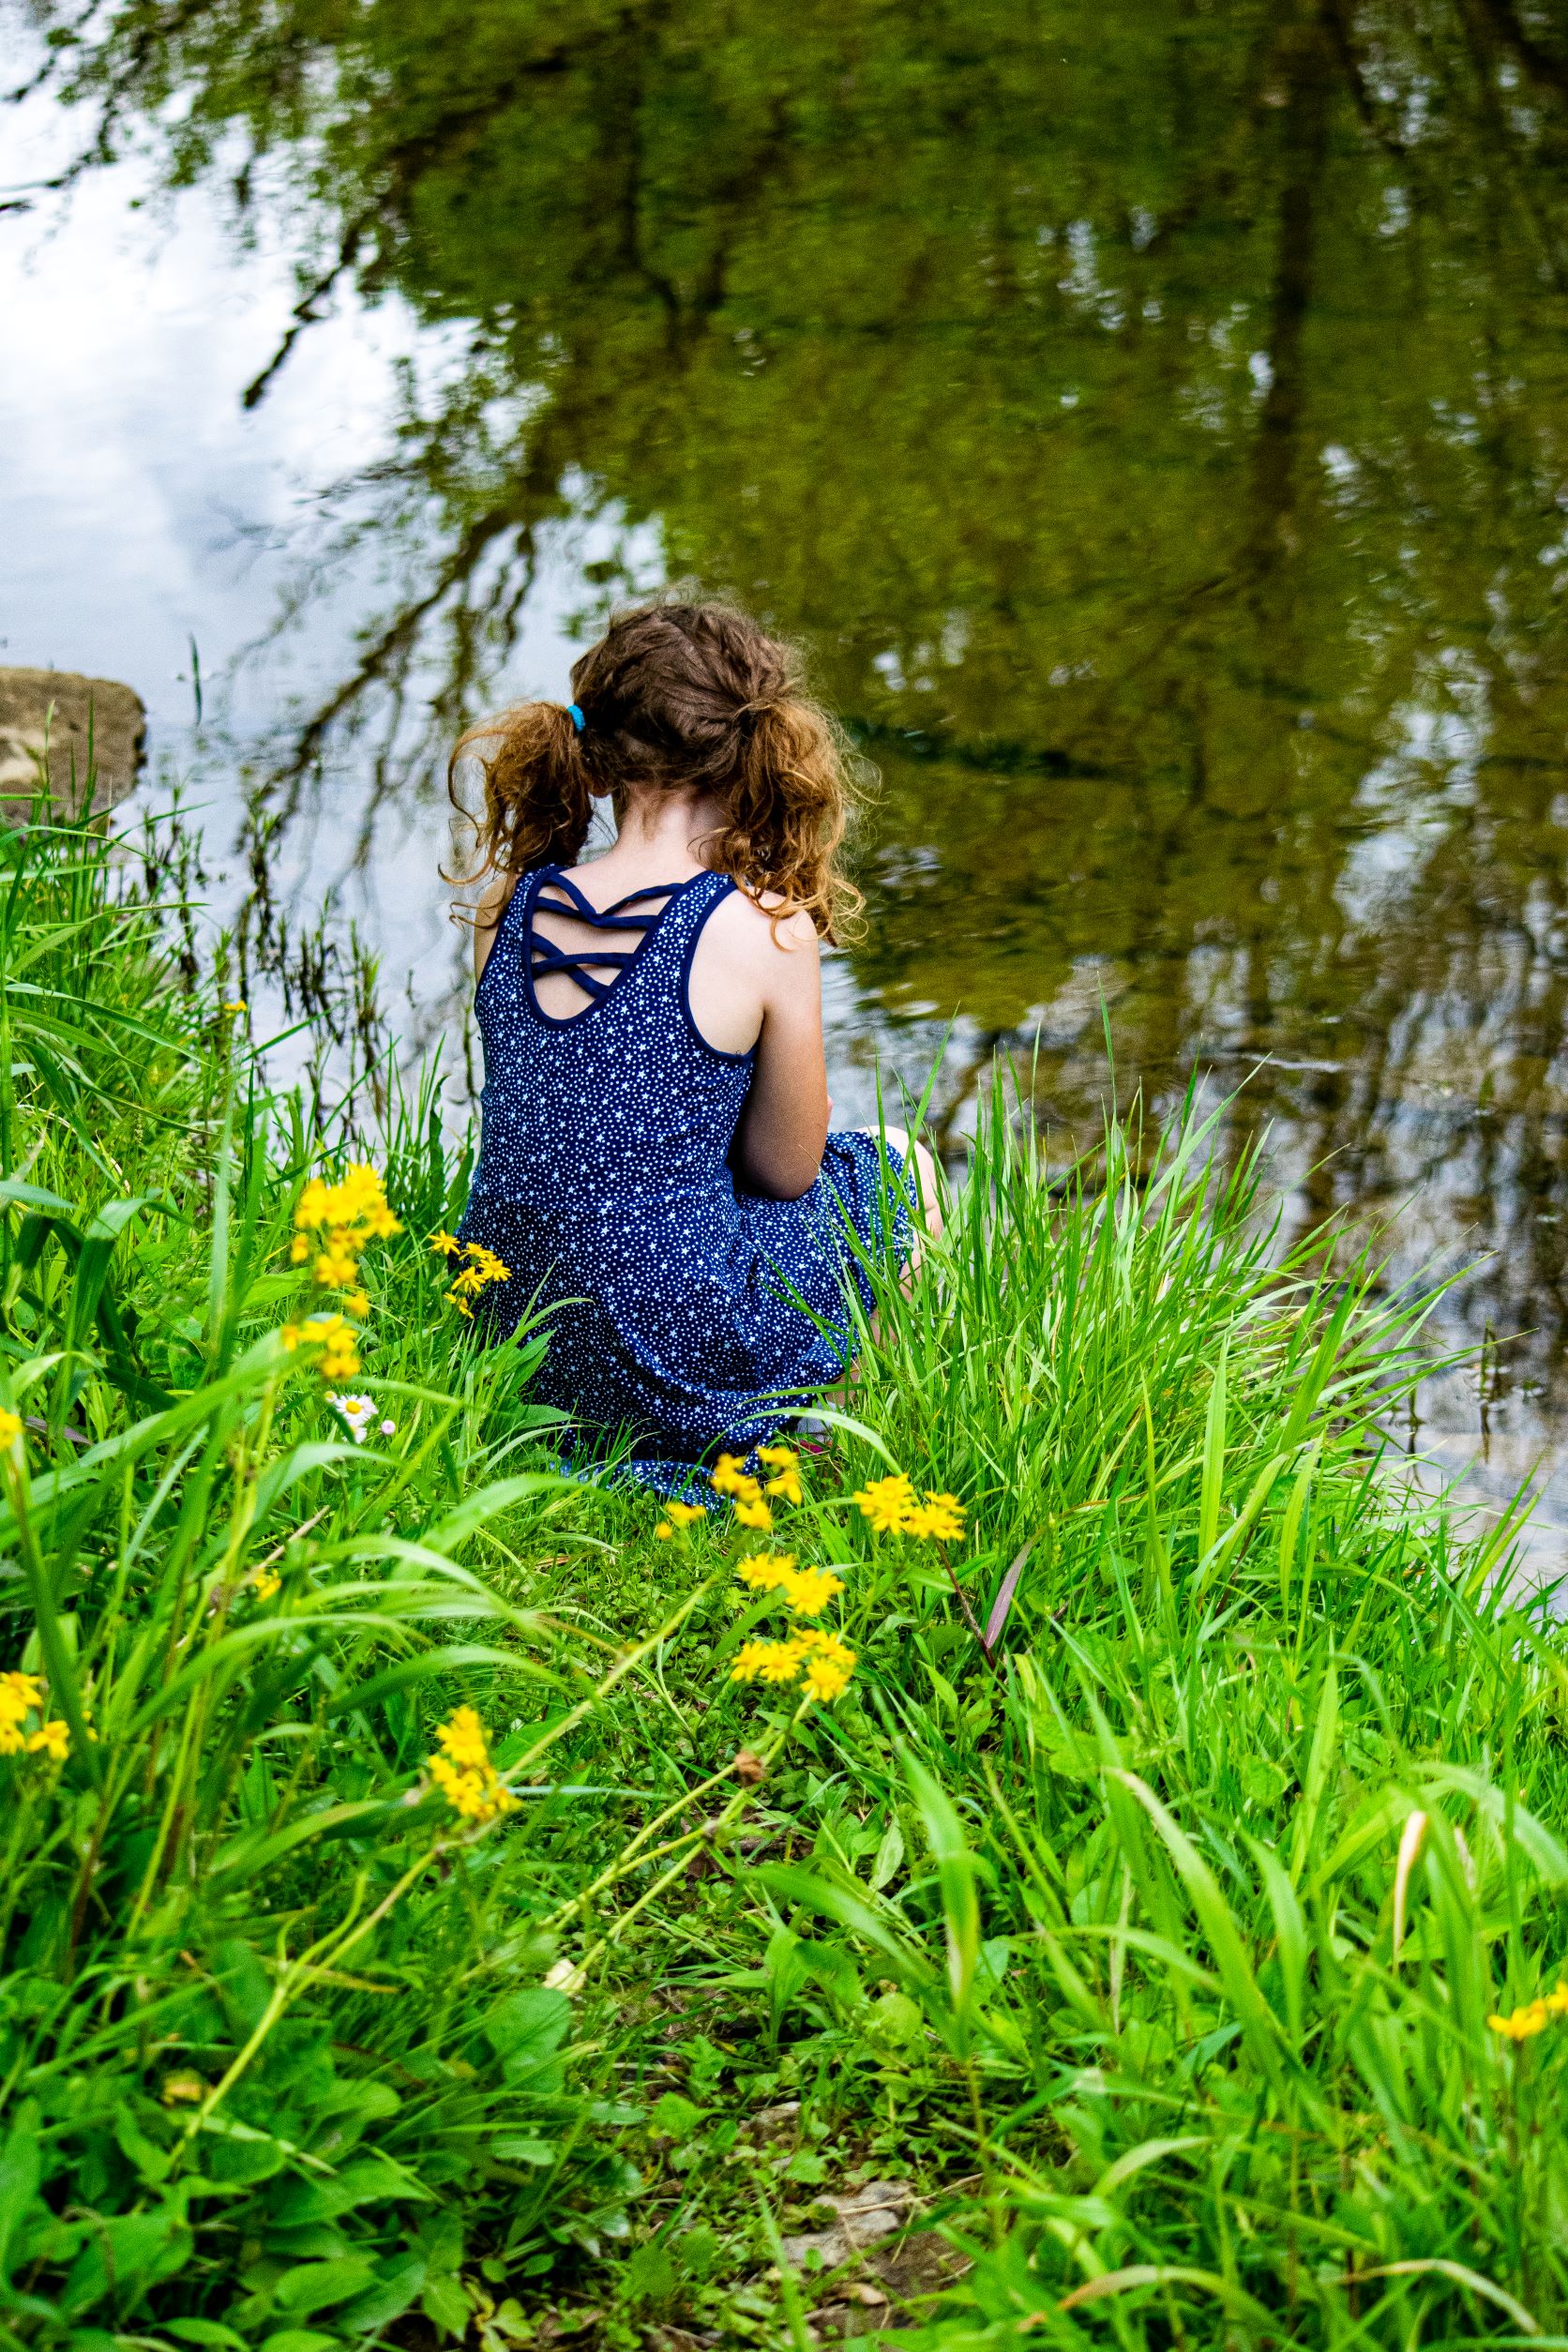 a young girl, with her back to the camera, sits at the edge of a pond on green grass